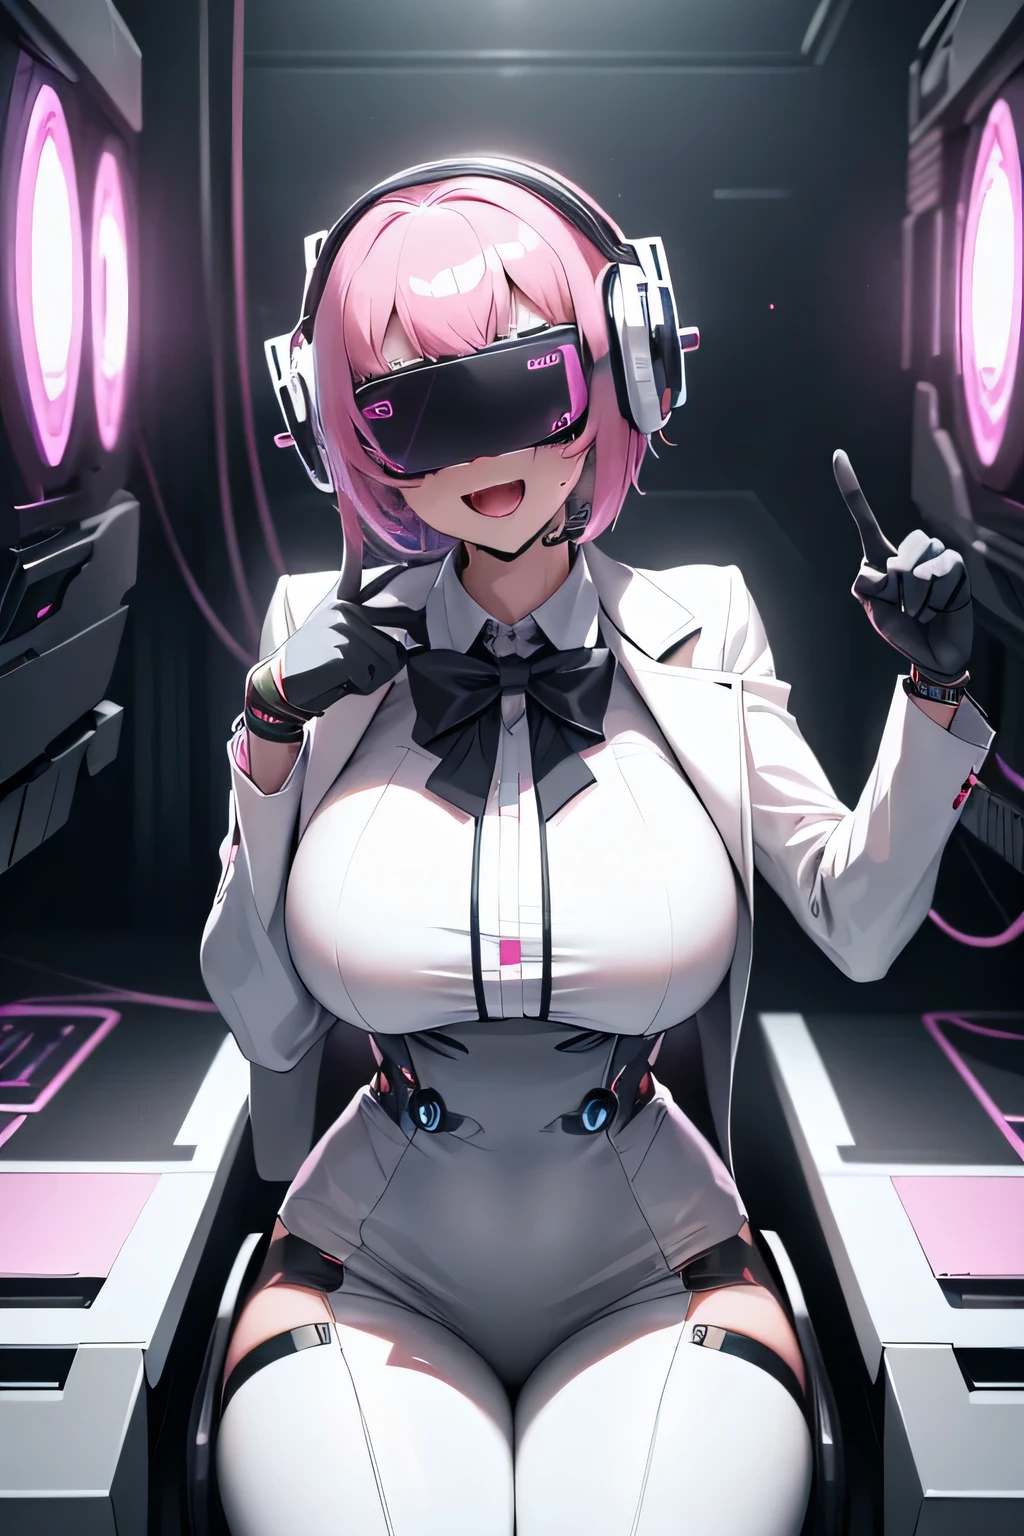 Anime cyborg girl sitting in a pilot seat wearing a virtual reality headset covering her eyes on her face with machinery and tubes and wires going inside her head and brain, (Best quality,highres:1.2), ultra-detailed, (realistic:1.3), cyberpunk, futuristic, portrait, shiny revealing latex outfit, cyber implants, virtual reality, drooling face, cables plugging into brain, shirt collar, bowtie, formal clothing, open mouth smile, facing viewer, girl is vibrating, glowing virtual reality headset, relaxed expression, blushing, cyber future formal wear, cyberpunk, futuristic, brain drain, cyber implants, virtual reality, drooling face, virtual reality headset covering eyes,  school uniform, big collar, high collar, open mouth smile, pleasured face expression, skin tight clothing, big shirt collar, big bowtie, biggest breasts in the world, light-emitting cable connected to brain, head antennas, oversized headphones, breasts are vibrating, open mouth drooling, pleasured expression, red face blush, cyborg, android, mechanical creature, mechanical torso, futuristic cyberpunk cyborg body, slim futuristic android, glowing lights on girls body, power cells, head is emitting pink light, formal shirt collar, big formal bowtie, , glowing nipples, big shirt collar, high collar, white collar, electrocution, girl being electrocuted, electricity, electricity sparks, pink hair, short hair, neon pink hair, body modification, orgasm, pleasure, (VR headset covering the eyes), pointing index finger up, half smile, excited expression, girl has a genius idea, picking noise with index funger, a mass of cables connected to the girl's brain, white suit coat, black vest, white dress shirt, nose picking, finger in nostril, girl picking her nose, holding index fingers up, pointing upward